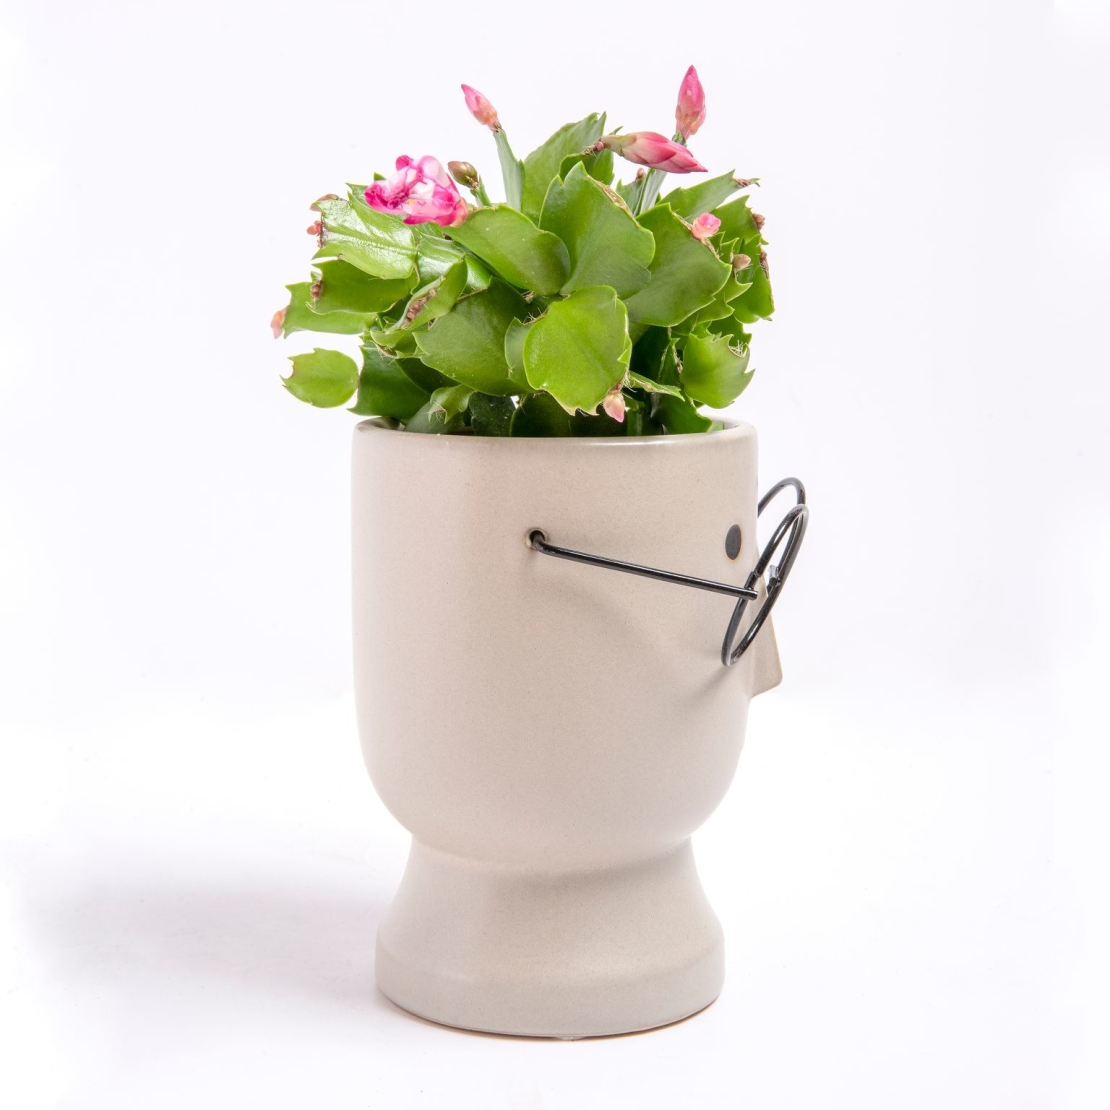 Zygocactus (Christmas Cactus) in a Face Flowerpot with Glasses